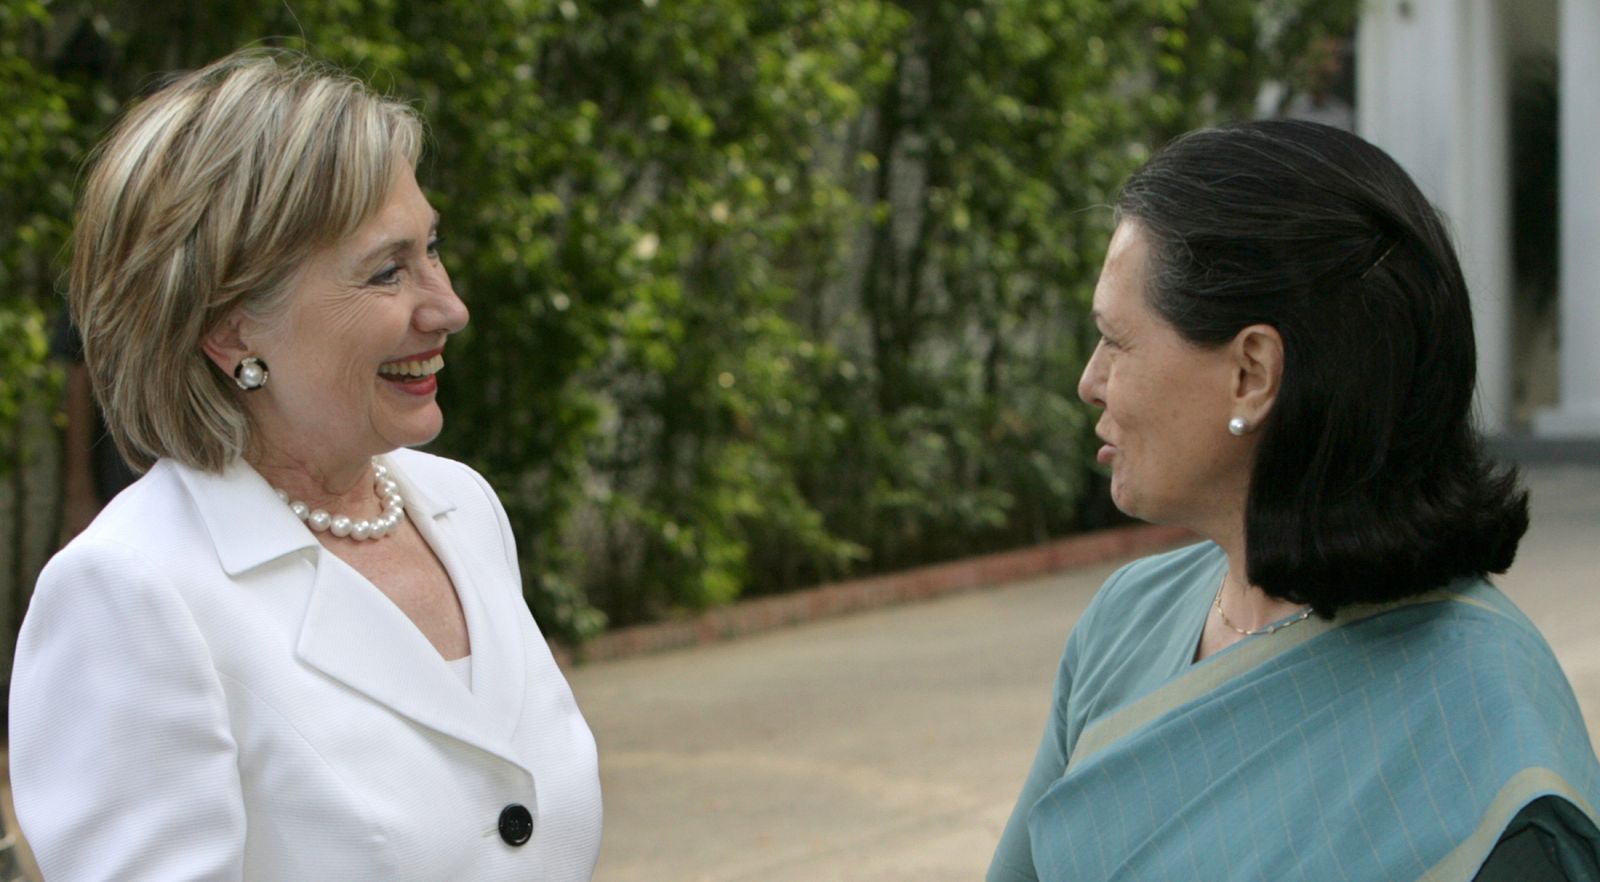 Chief of India's ruling Congress party Sonia Gandhi speaks with U.S. Secretary of State Hillary Clinton before their meeting in New Delhi